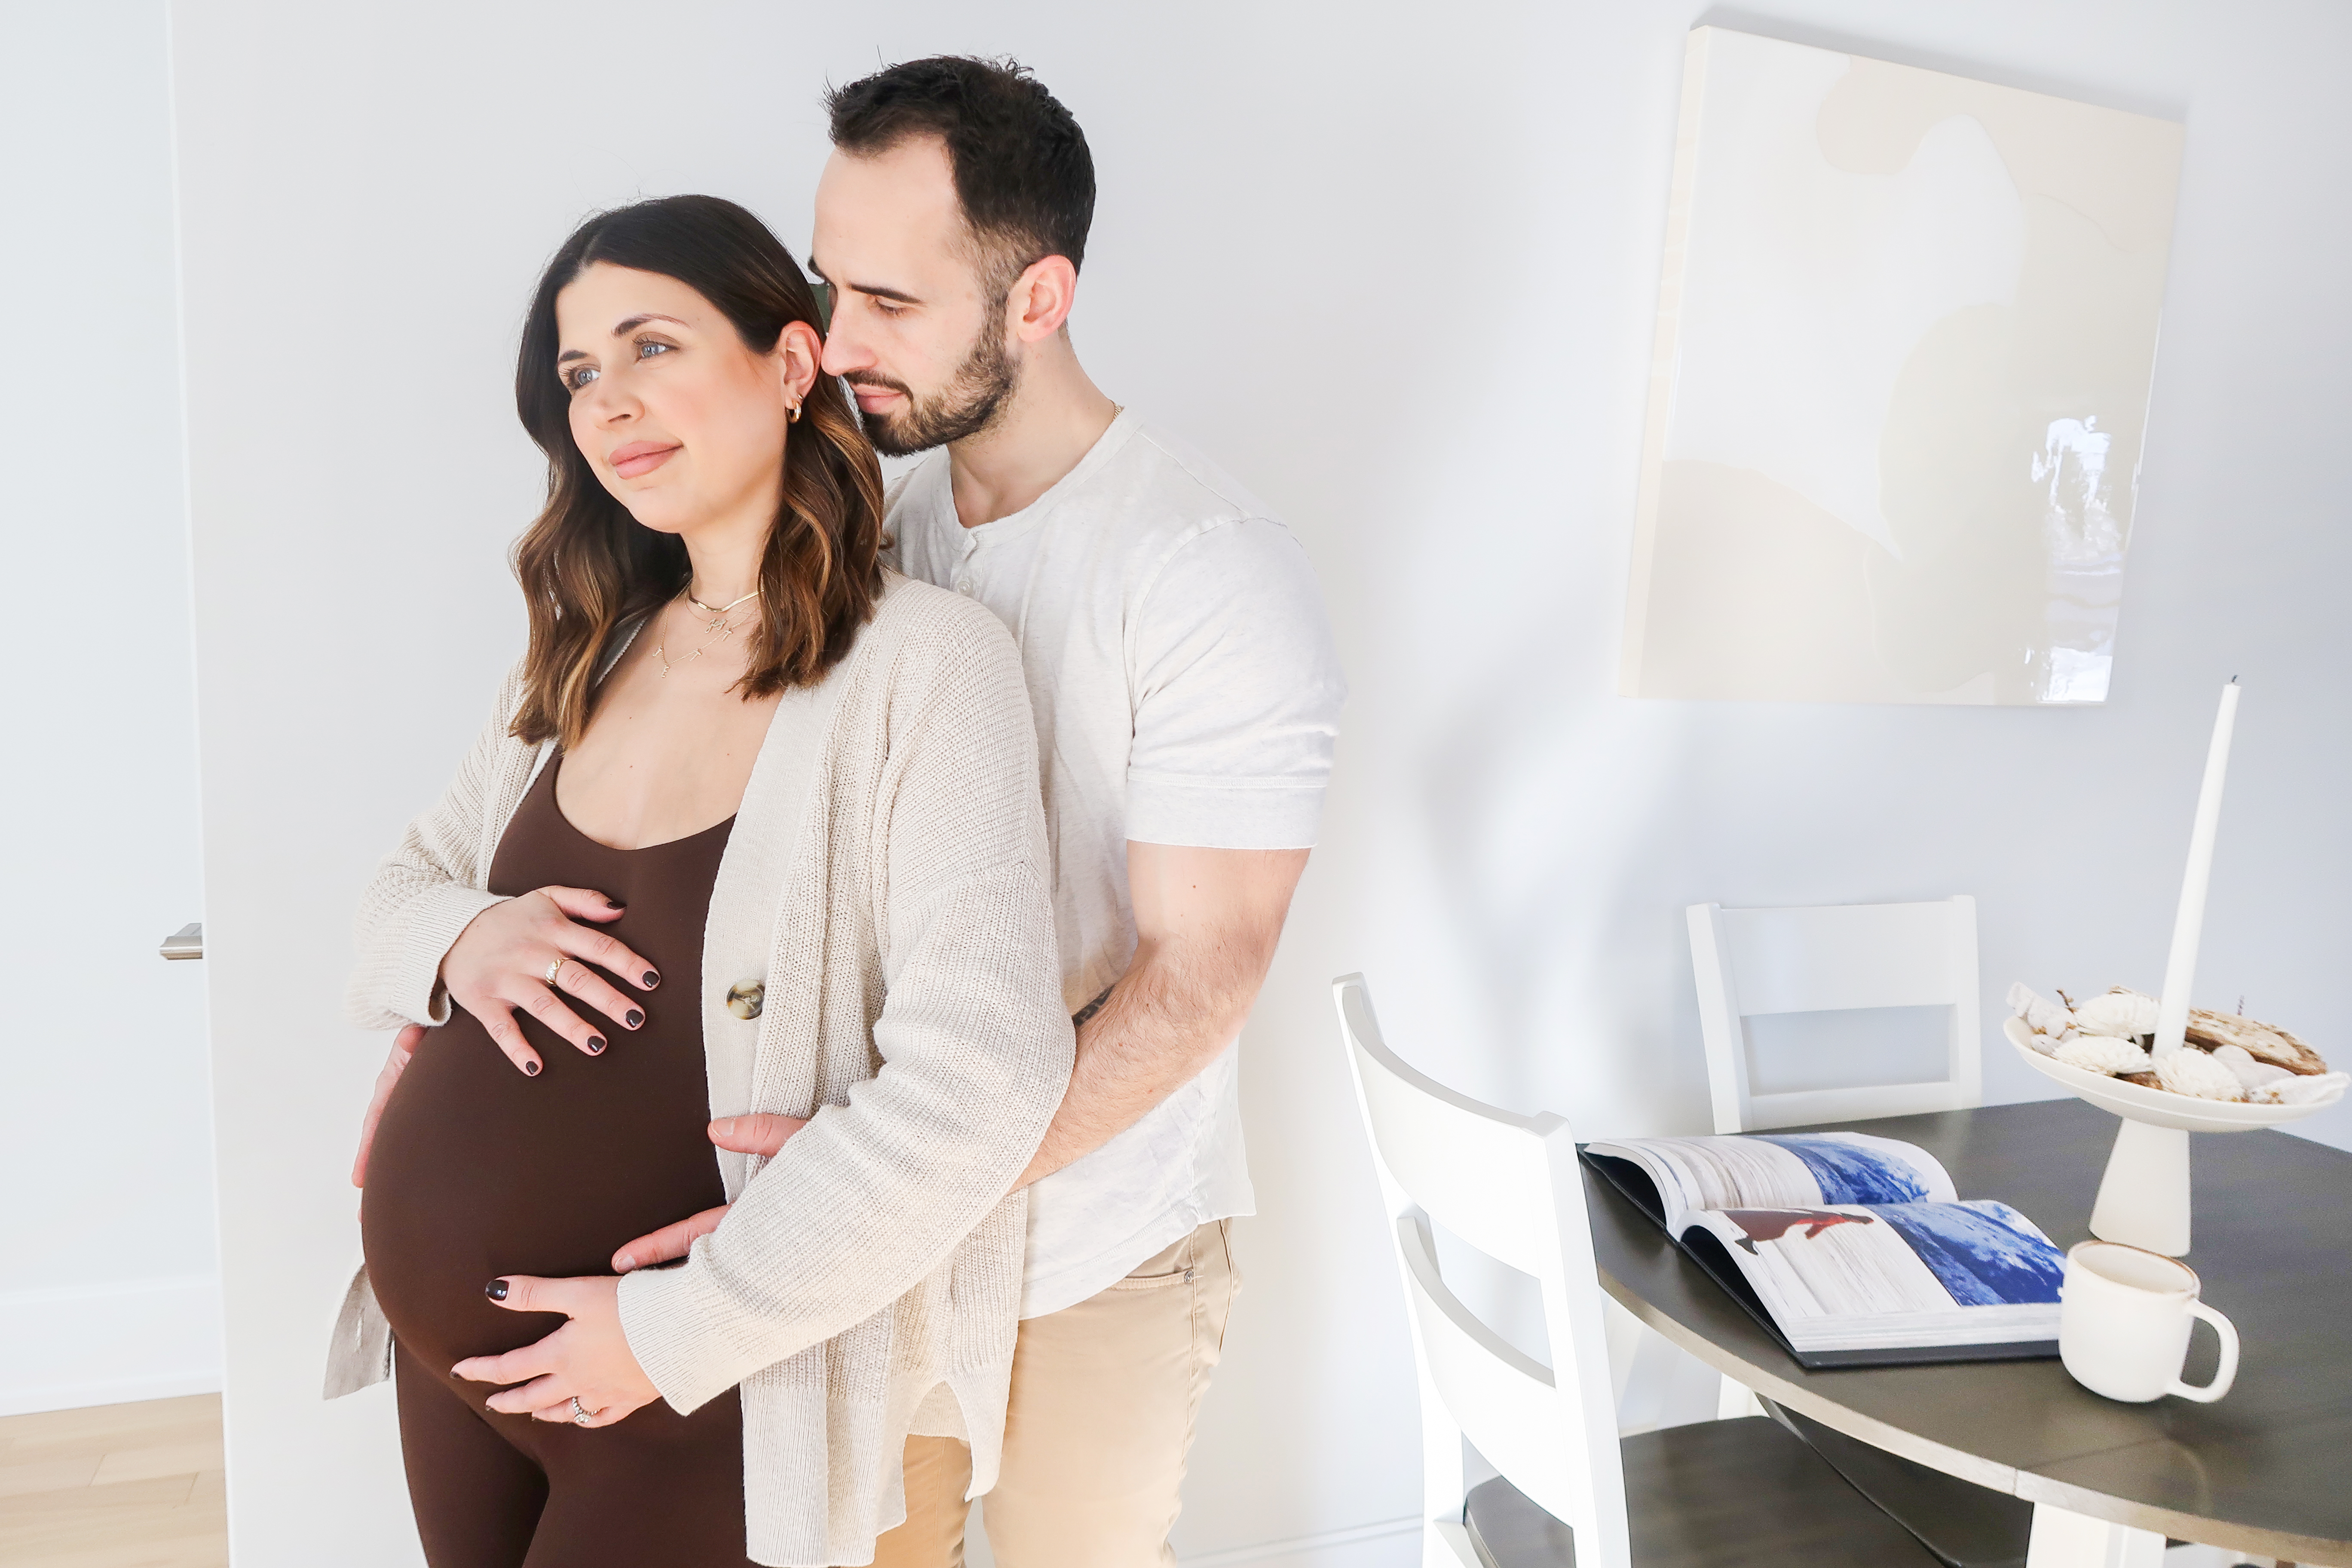 Importance of Nutrition During Pregnancy: Pregnant woman and partner in the kitchen